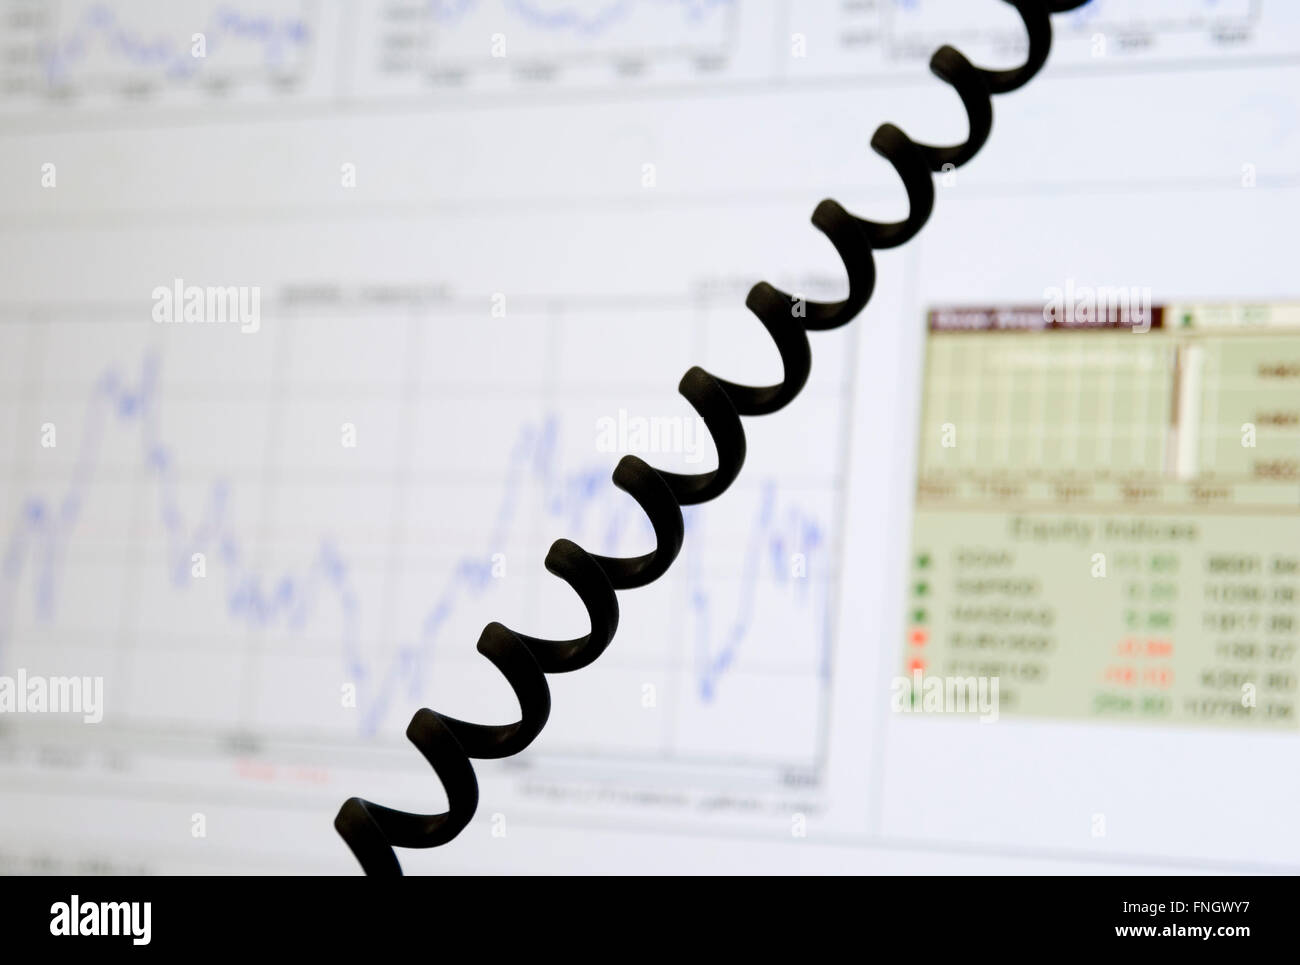 charts with financial data on monitor and telephone cable Stock Photo